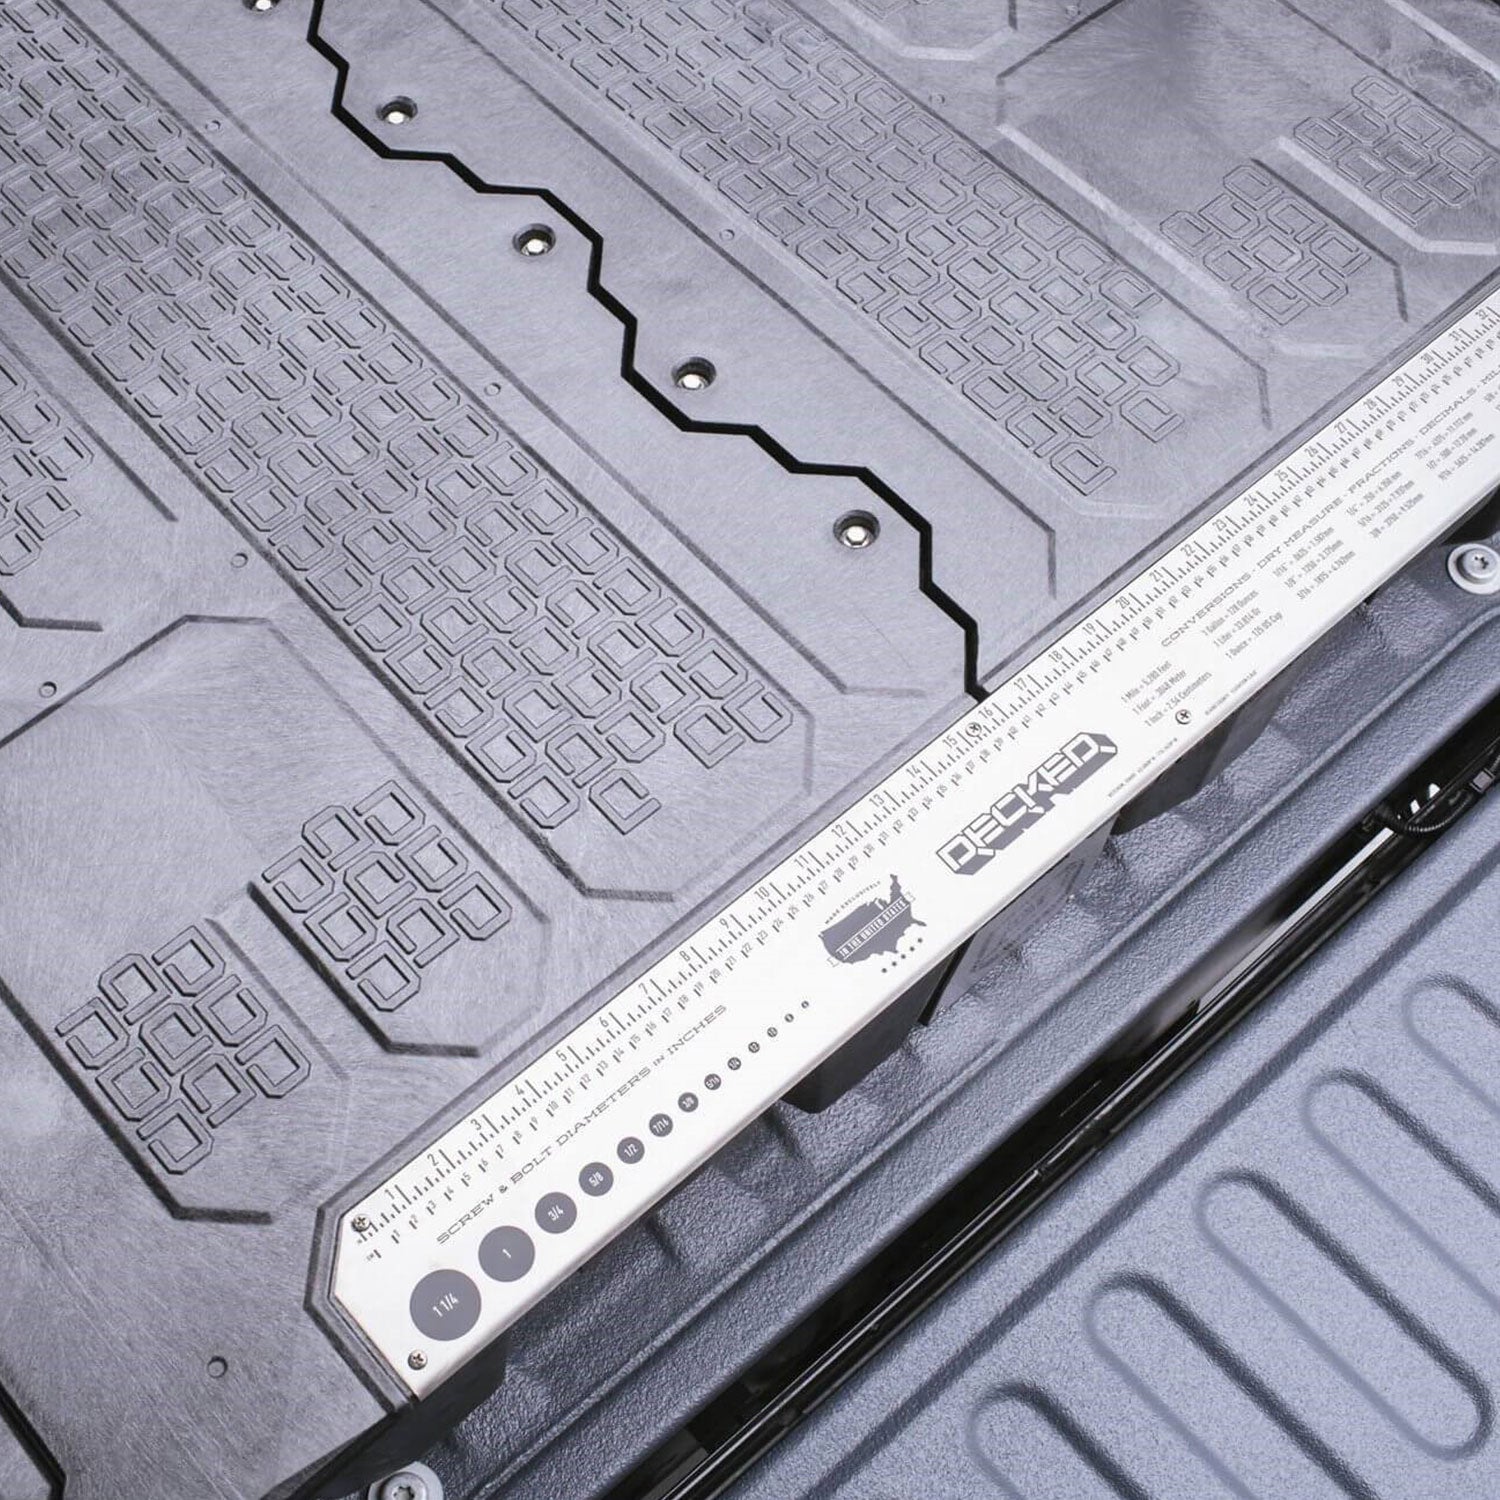 DECKED Ram 2500 and 3500 Truck Drawer System